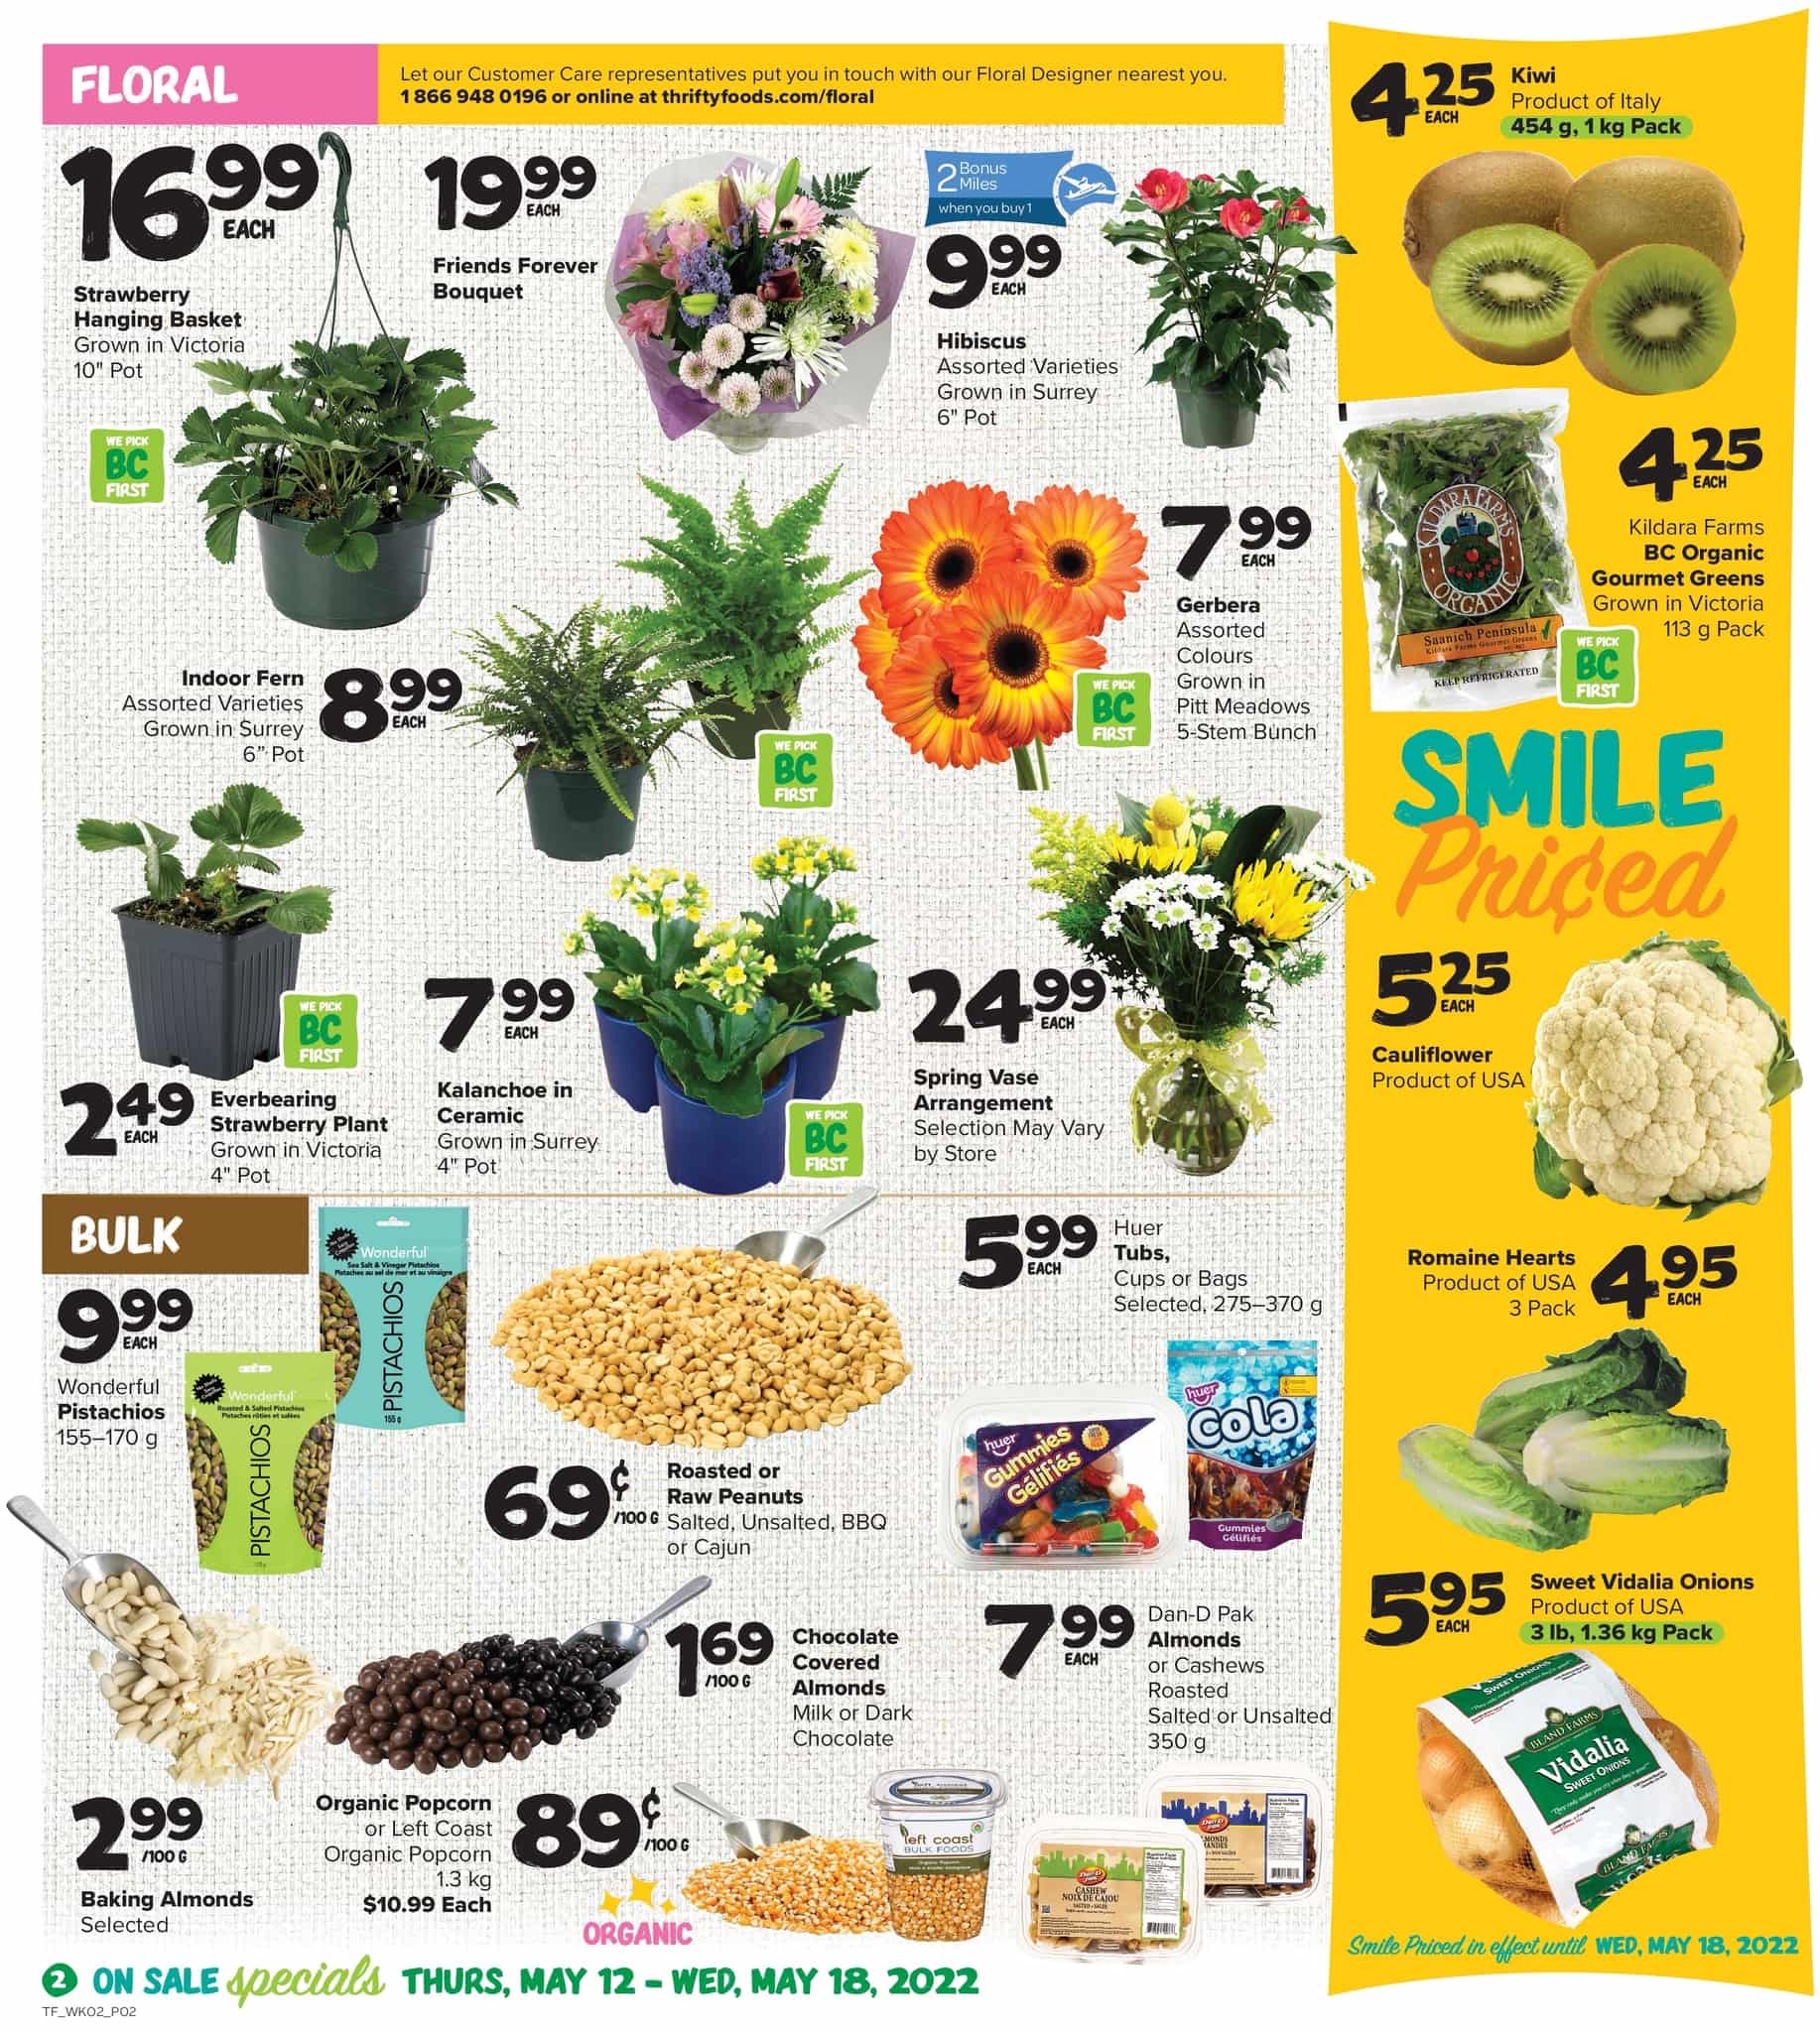 Thrifty Foods - Weekly Flyer Specials - Page 2